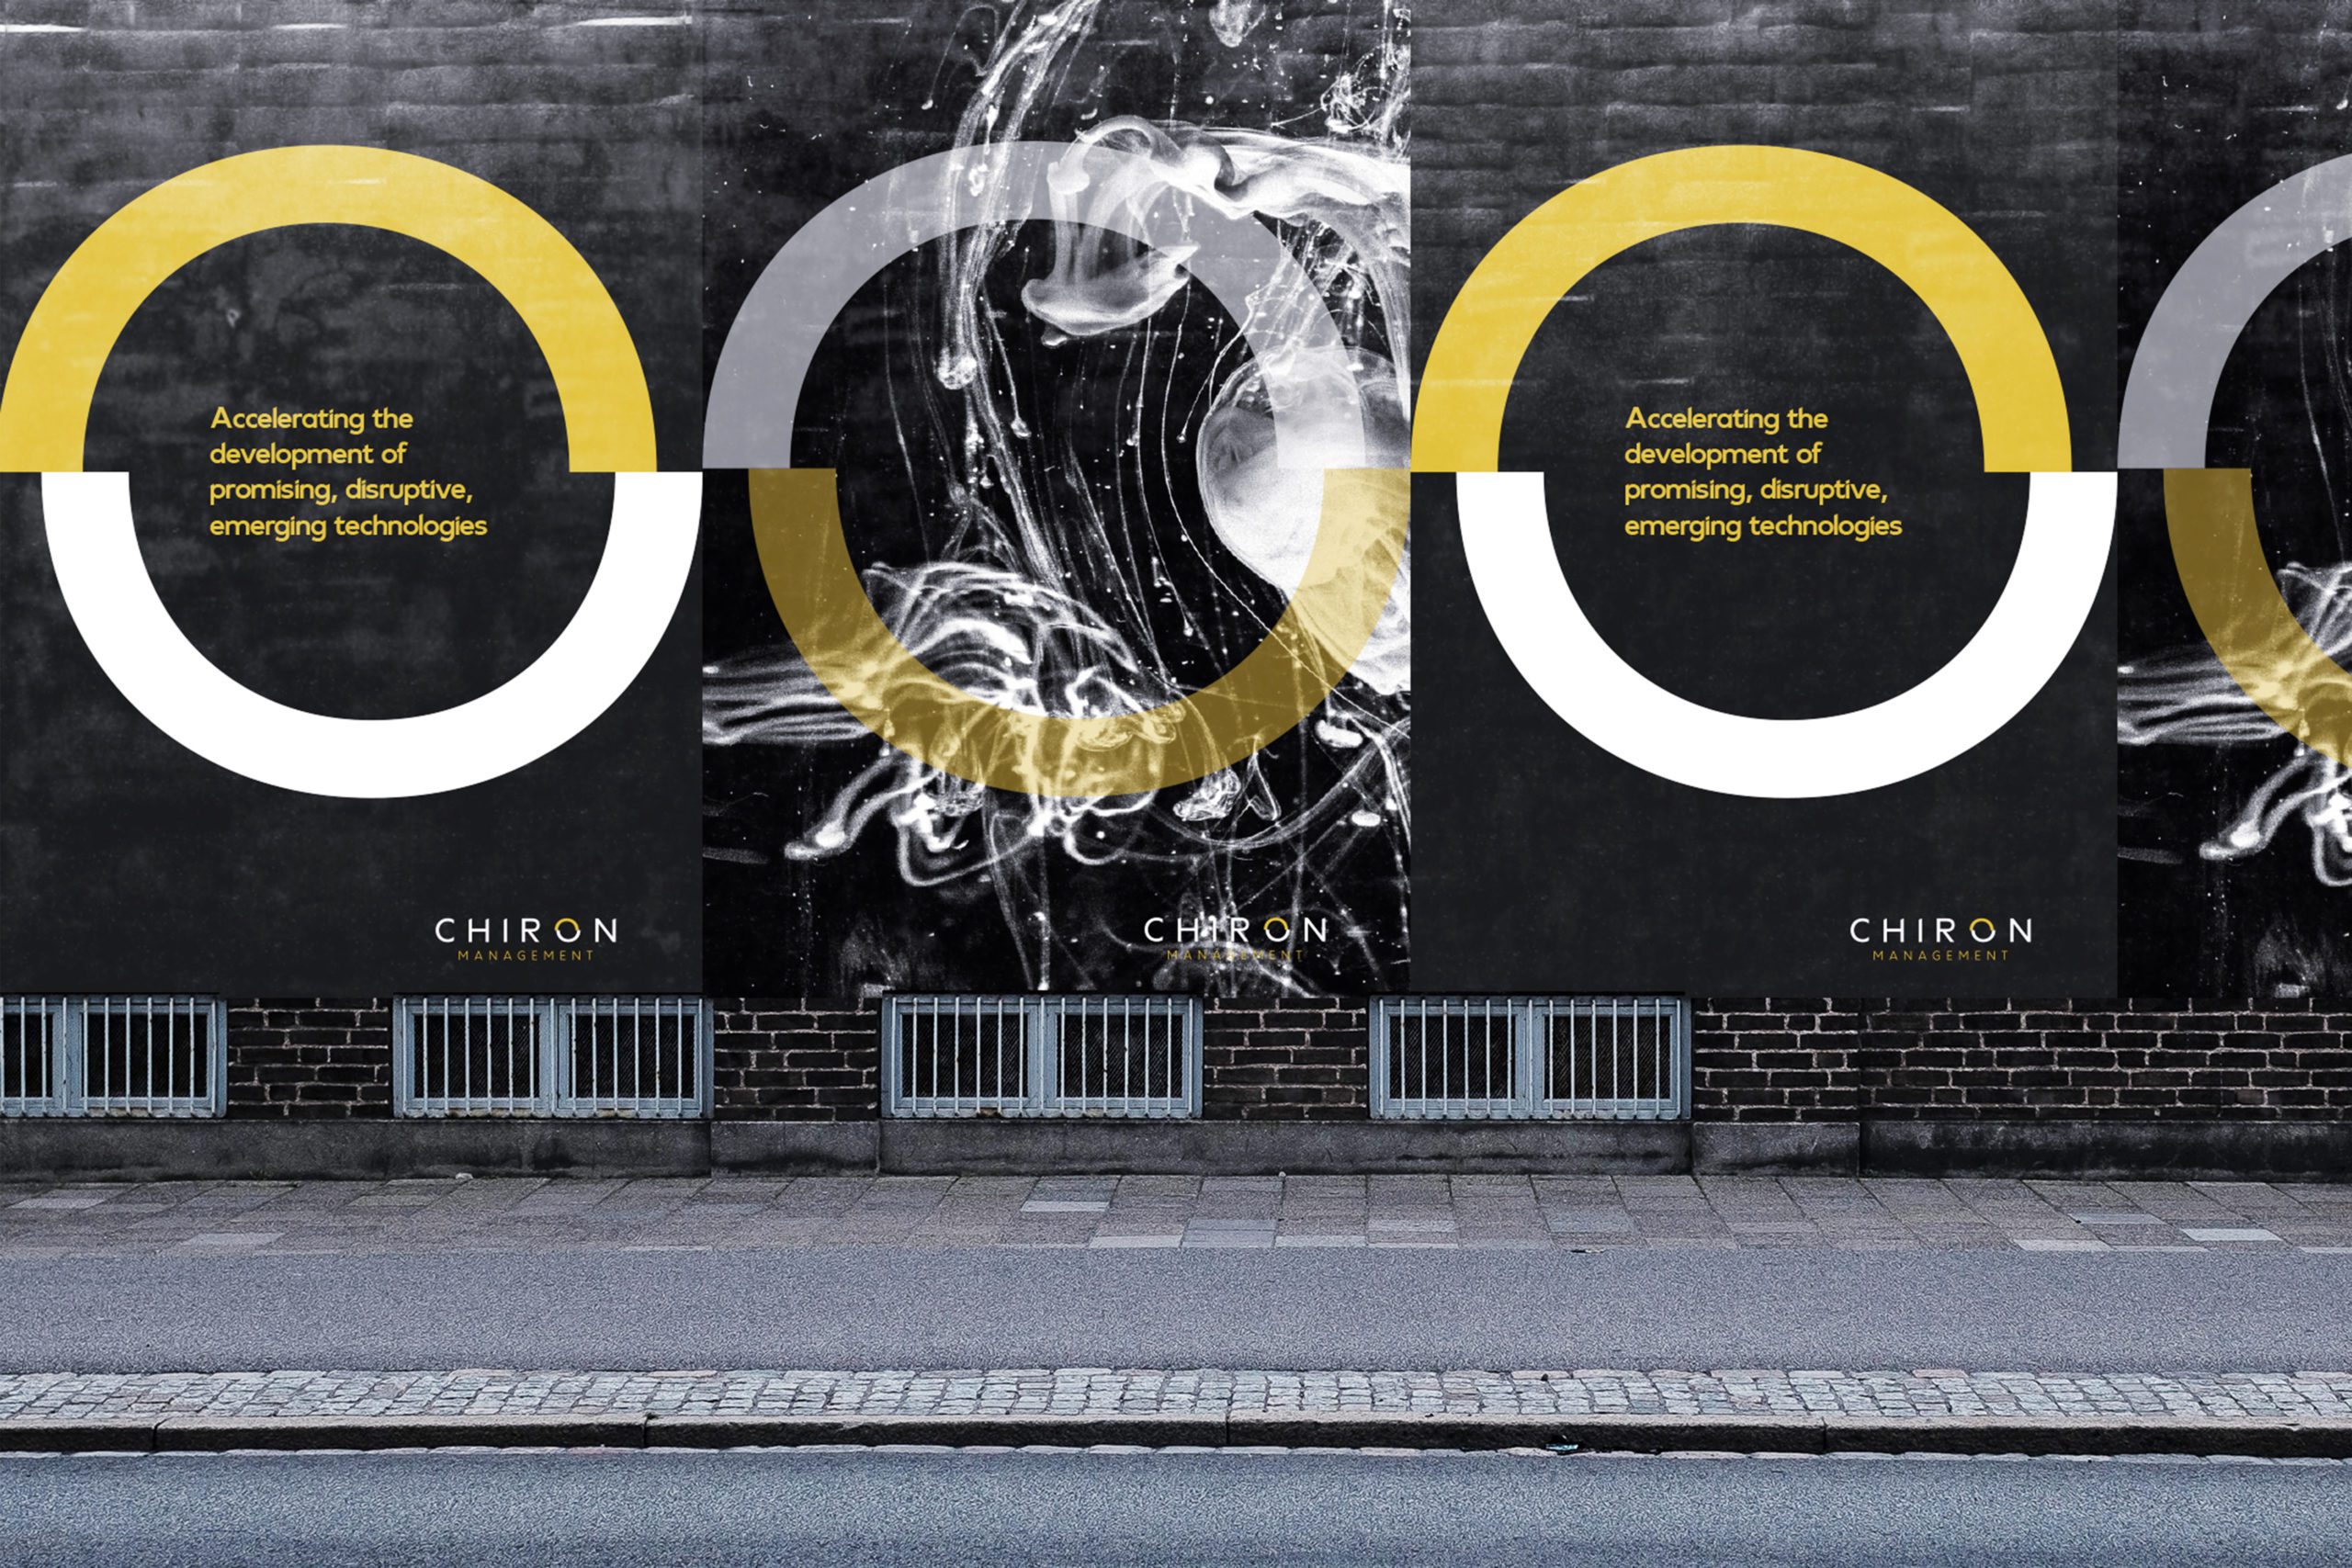 Chiron Partners marketing campagne displayed on street